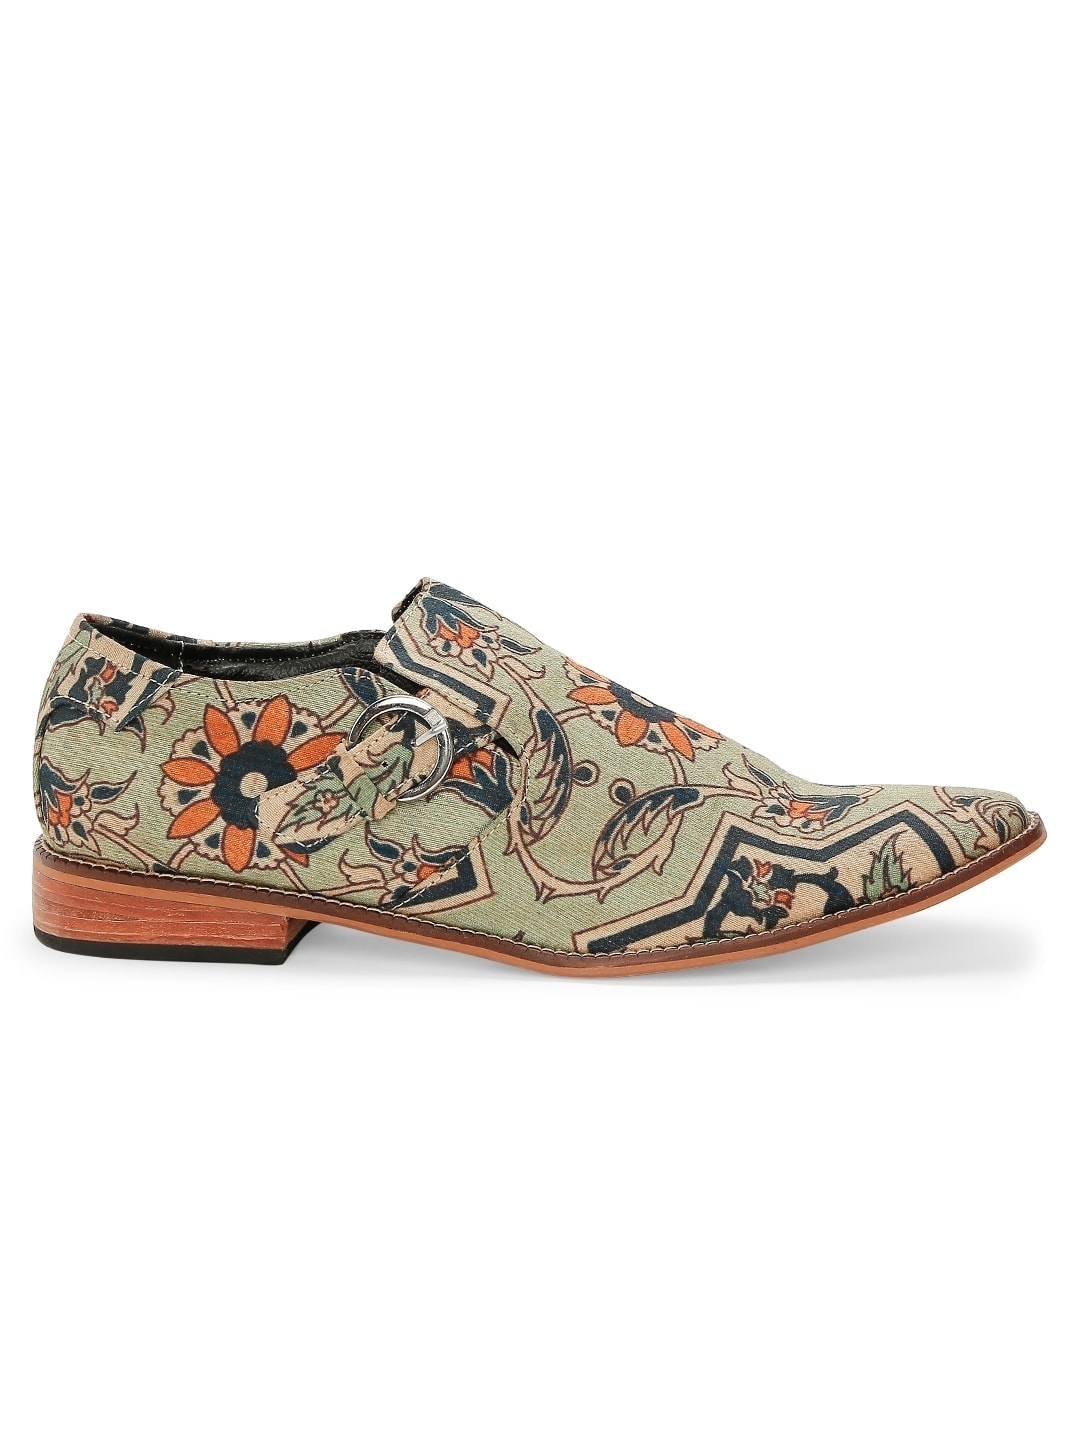 Mughal Powder Blue Buckle Up Loafers